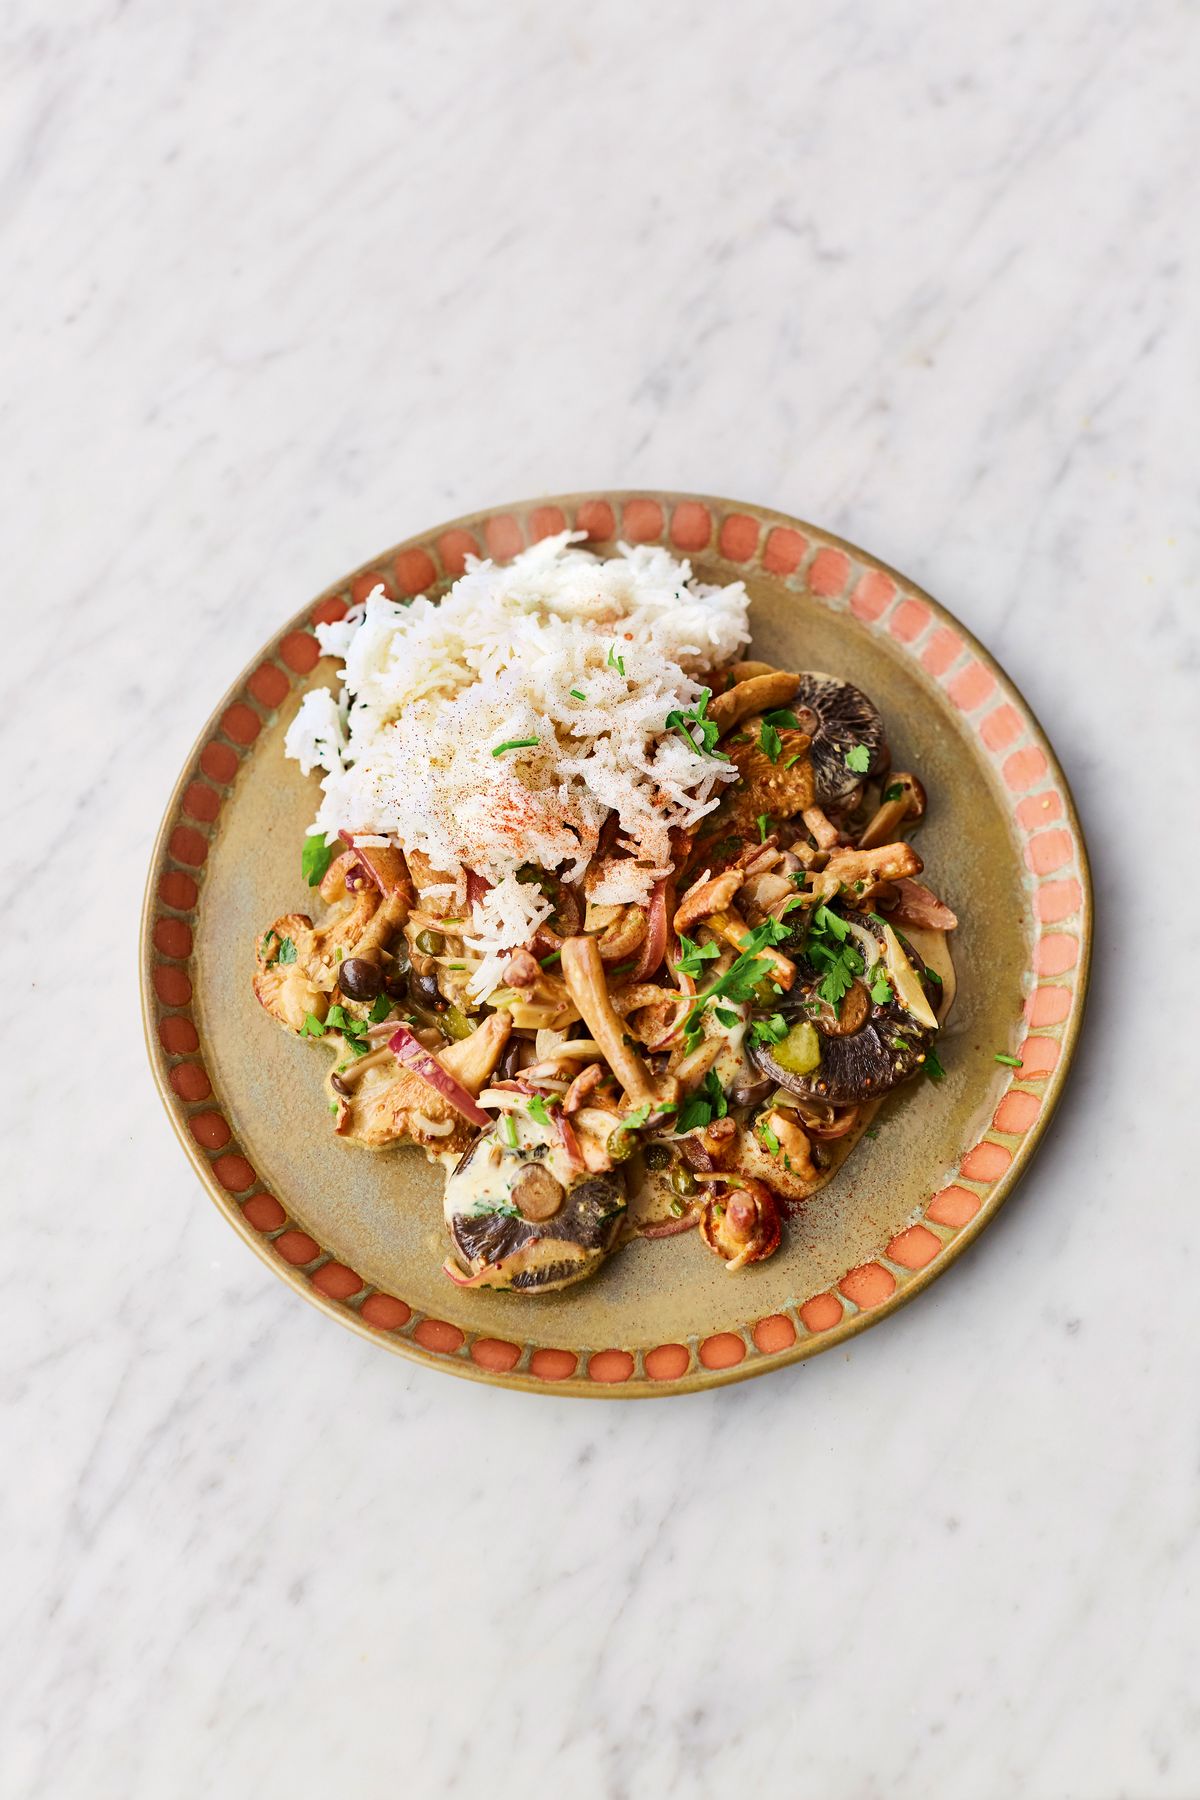 Jamie Oliver’s Mushroom Stroganoff with Crunchy Cornichons, Fragrant Capers, Creamy Whisky Sauce and Parsley